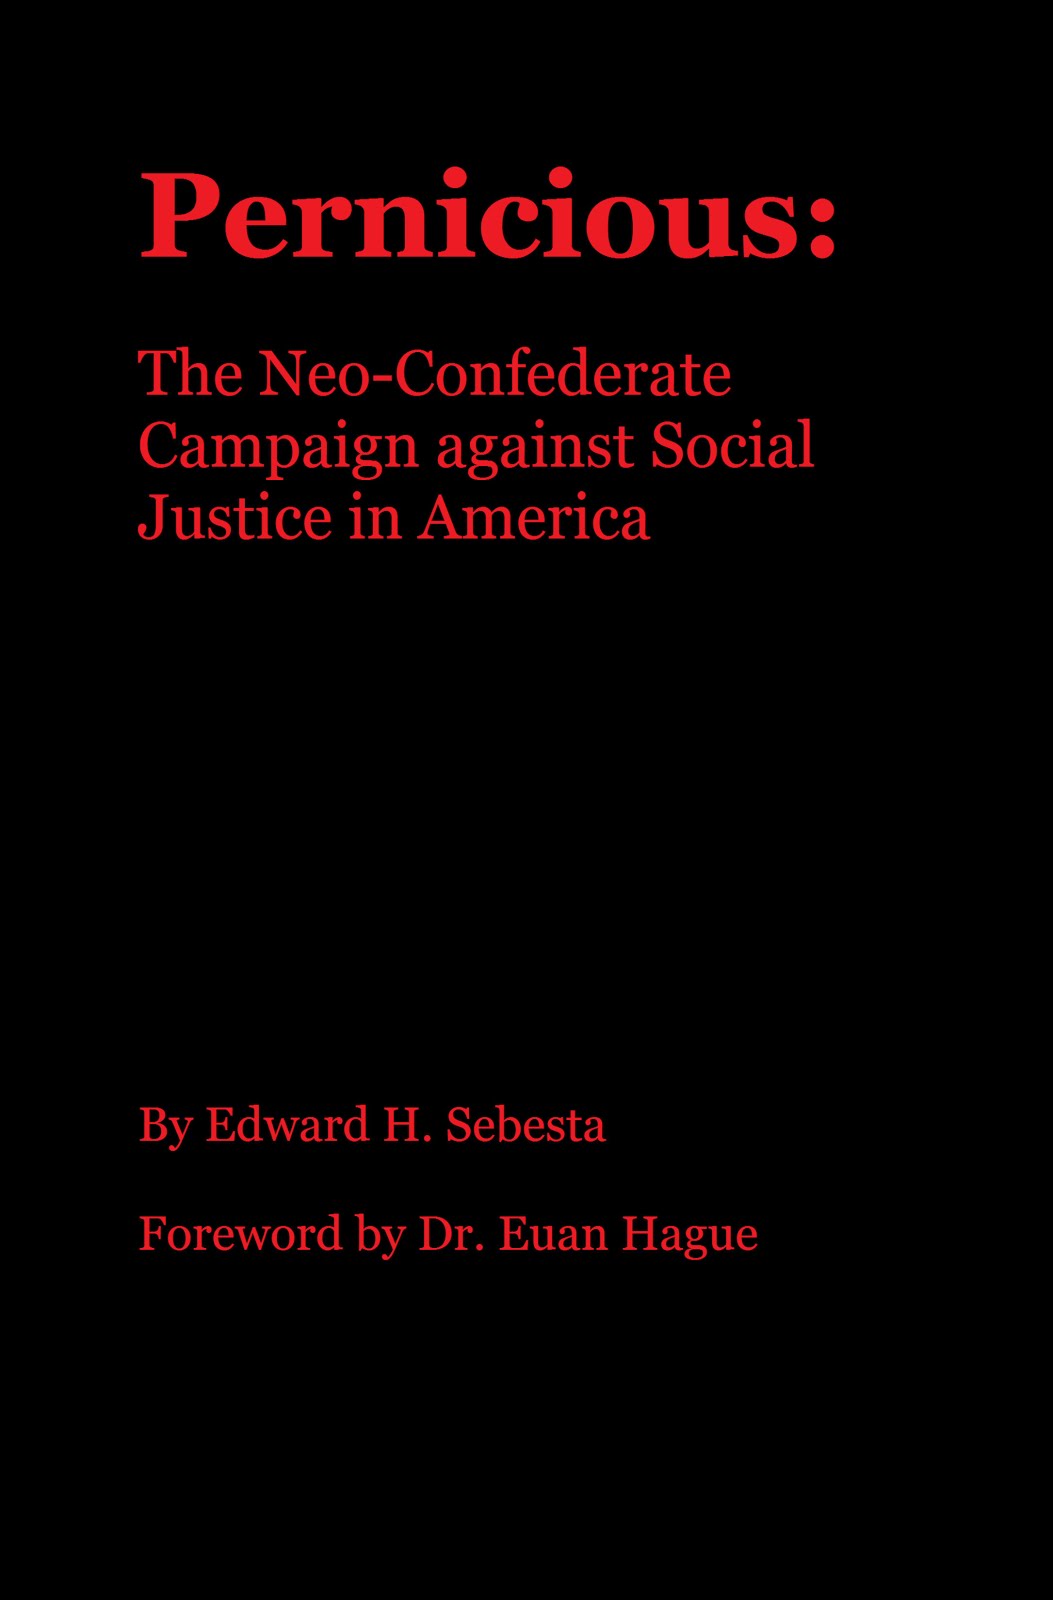 Pernicious: The Neo-Confederate Campaign against Social Justice